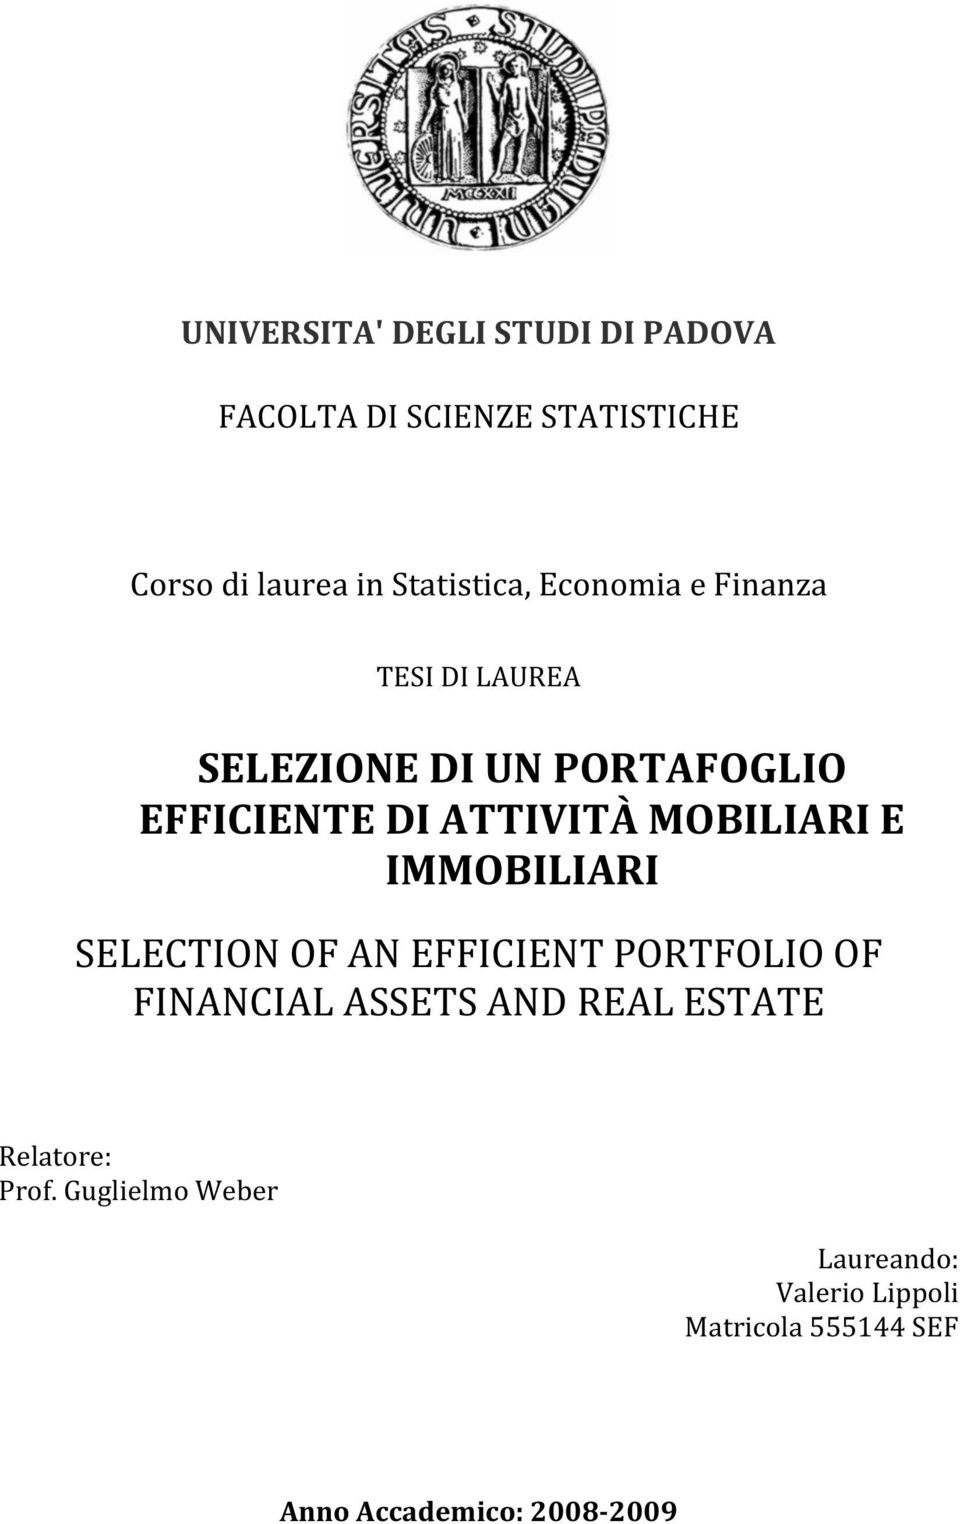 E IMMOBILIARI SELECTION OF AN EFFICIENT PORTFOLIO OF FINANCIAL ASSETS AND REAL ESTATE Relatore: